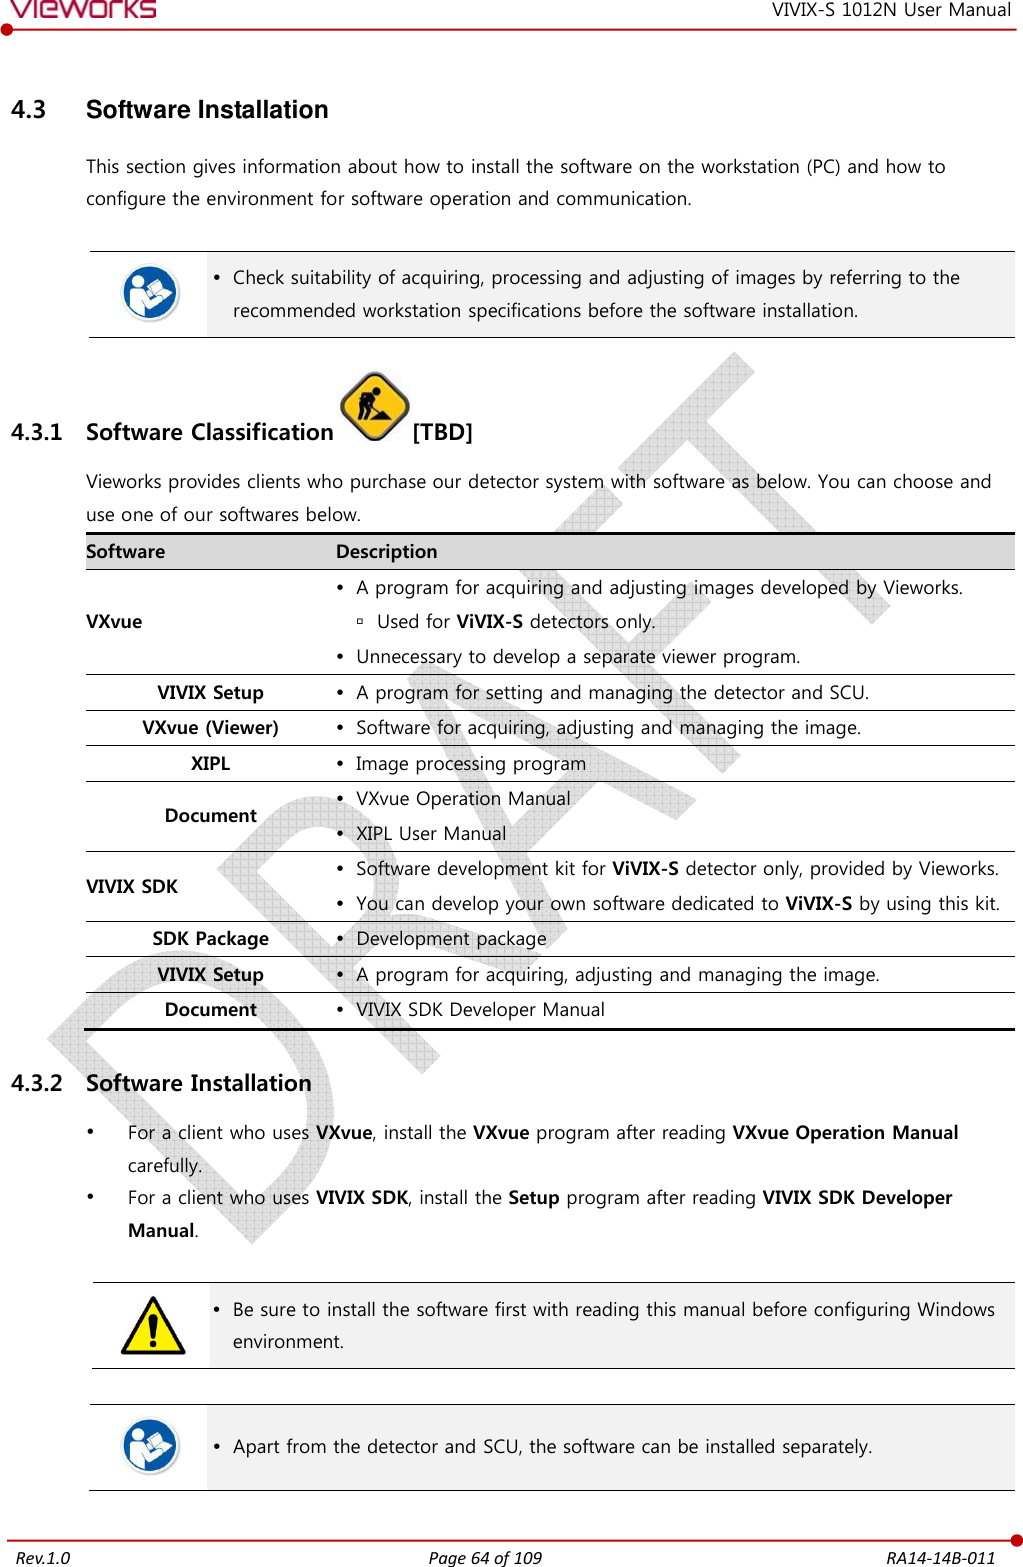   Rev.1.0 Page 64 of 109  RA14-14B-011 VIVIX-S 1012N User Manual 4.3  Software Installation This section gives information about how to install the software on the workstation (PC) and how to configure the environment for software operation and communication.    Check suitability of acquiring, processing and adjusting of images by referring to the recommended workstation specifications before the software installation. 4.3.1 Software Classification [TBD] Vieworks provides clients who purchase our detector system with software as below. You can choose and use one of our softwares below. Software  Description VXvue  A program for acquiring and adjusting images developed by Vieworks.  Used for ViVIX-S detectors only.  Unnecessary to develop a separate viewer program. VIVIX Setup   A program for setting and managing the detector and SCU. VXvue (Viewer)   Software for acquiring, adjusting and managing the image. XIPL   Image processing program Document  VXvue Operation Manual  XIPL User Manual VIVIX SDK  Software development kit for ViVIX-S detector only, provided by Vieworks.  You can develop your own software dedicated to ViVIX-S by using this kit. SDK Package   Development package VIVIX Setup   A program for acquiring, adjusting and managing the image. Document   VIVIX SDK Developer Manual 4.3.2 Software Installation  For a client who uses VXvue, install the VXvue program after reading VXvue Operation Manual carefully.  For a client who uses VIVIX SDK, install the Setup program after reading VIVIX SDK Developer Manual.    Be sure to install the software first with reading this manual before configuring Windows environment.    Apart from the detector and SCU, the software can be installed separately.  